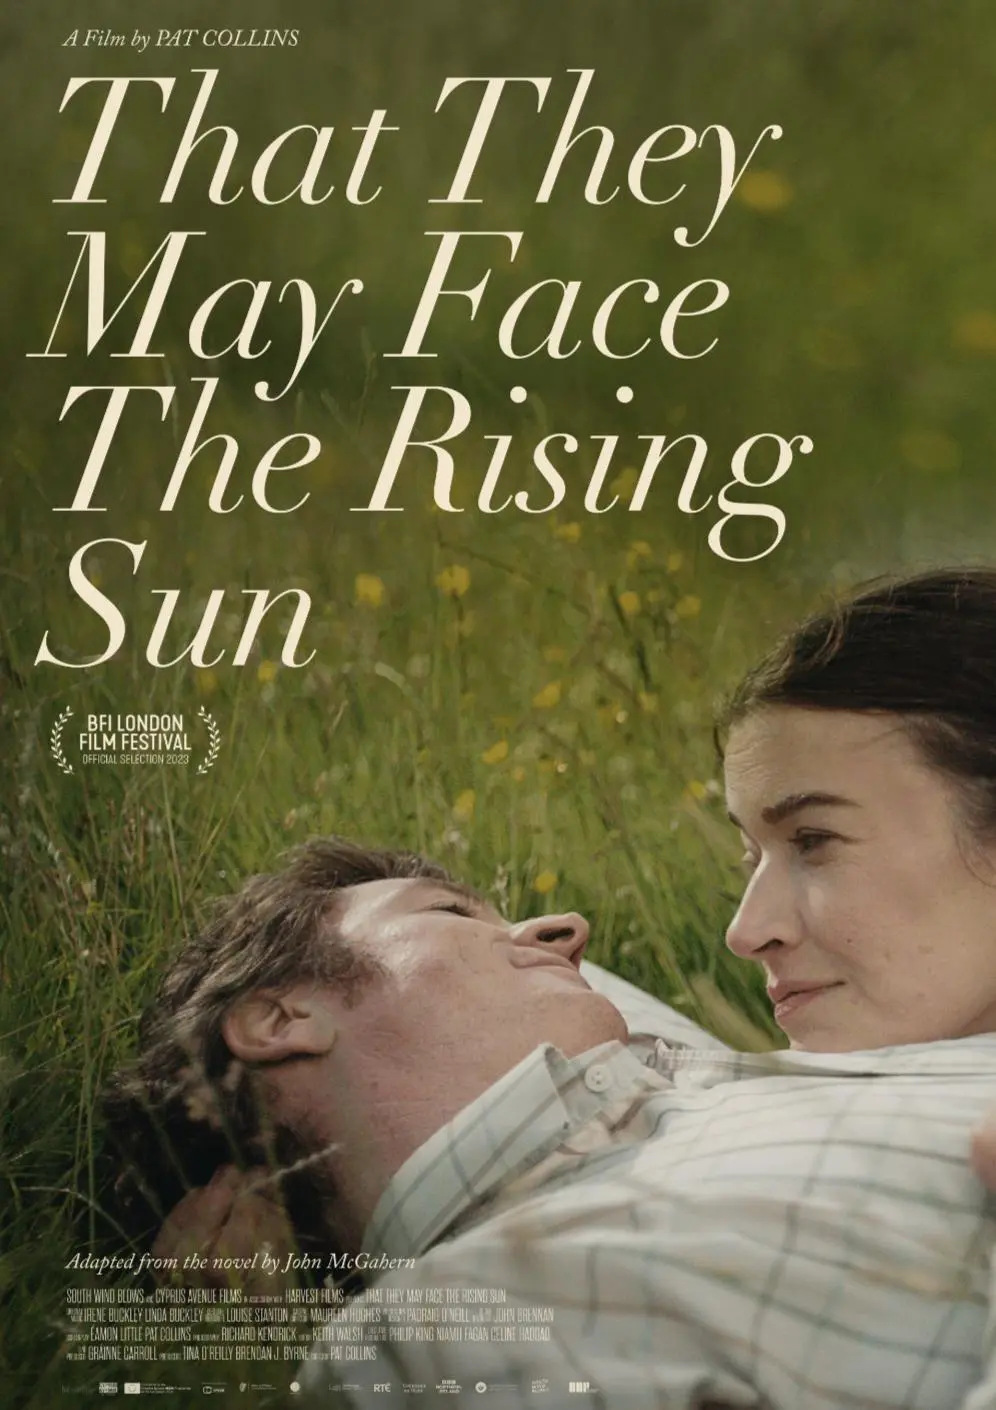 That They May Face The Rising Sun + Director Q&A